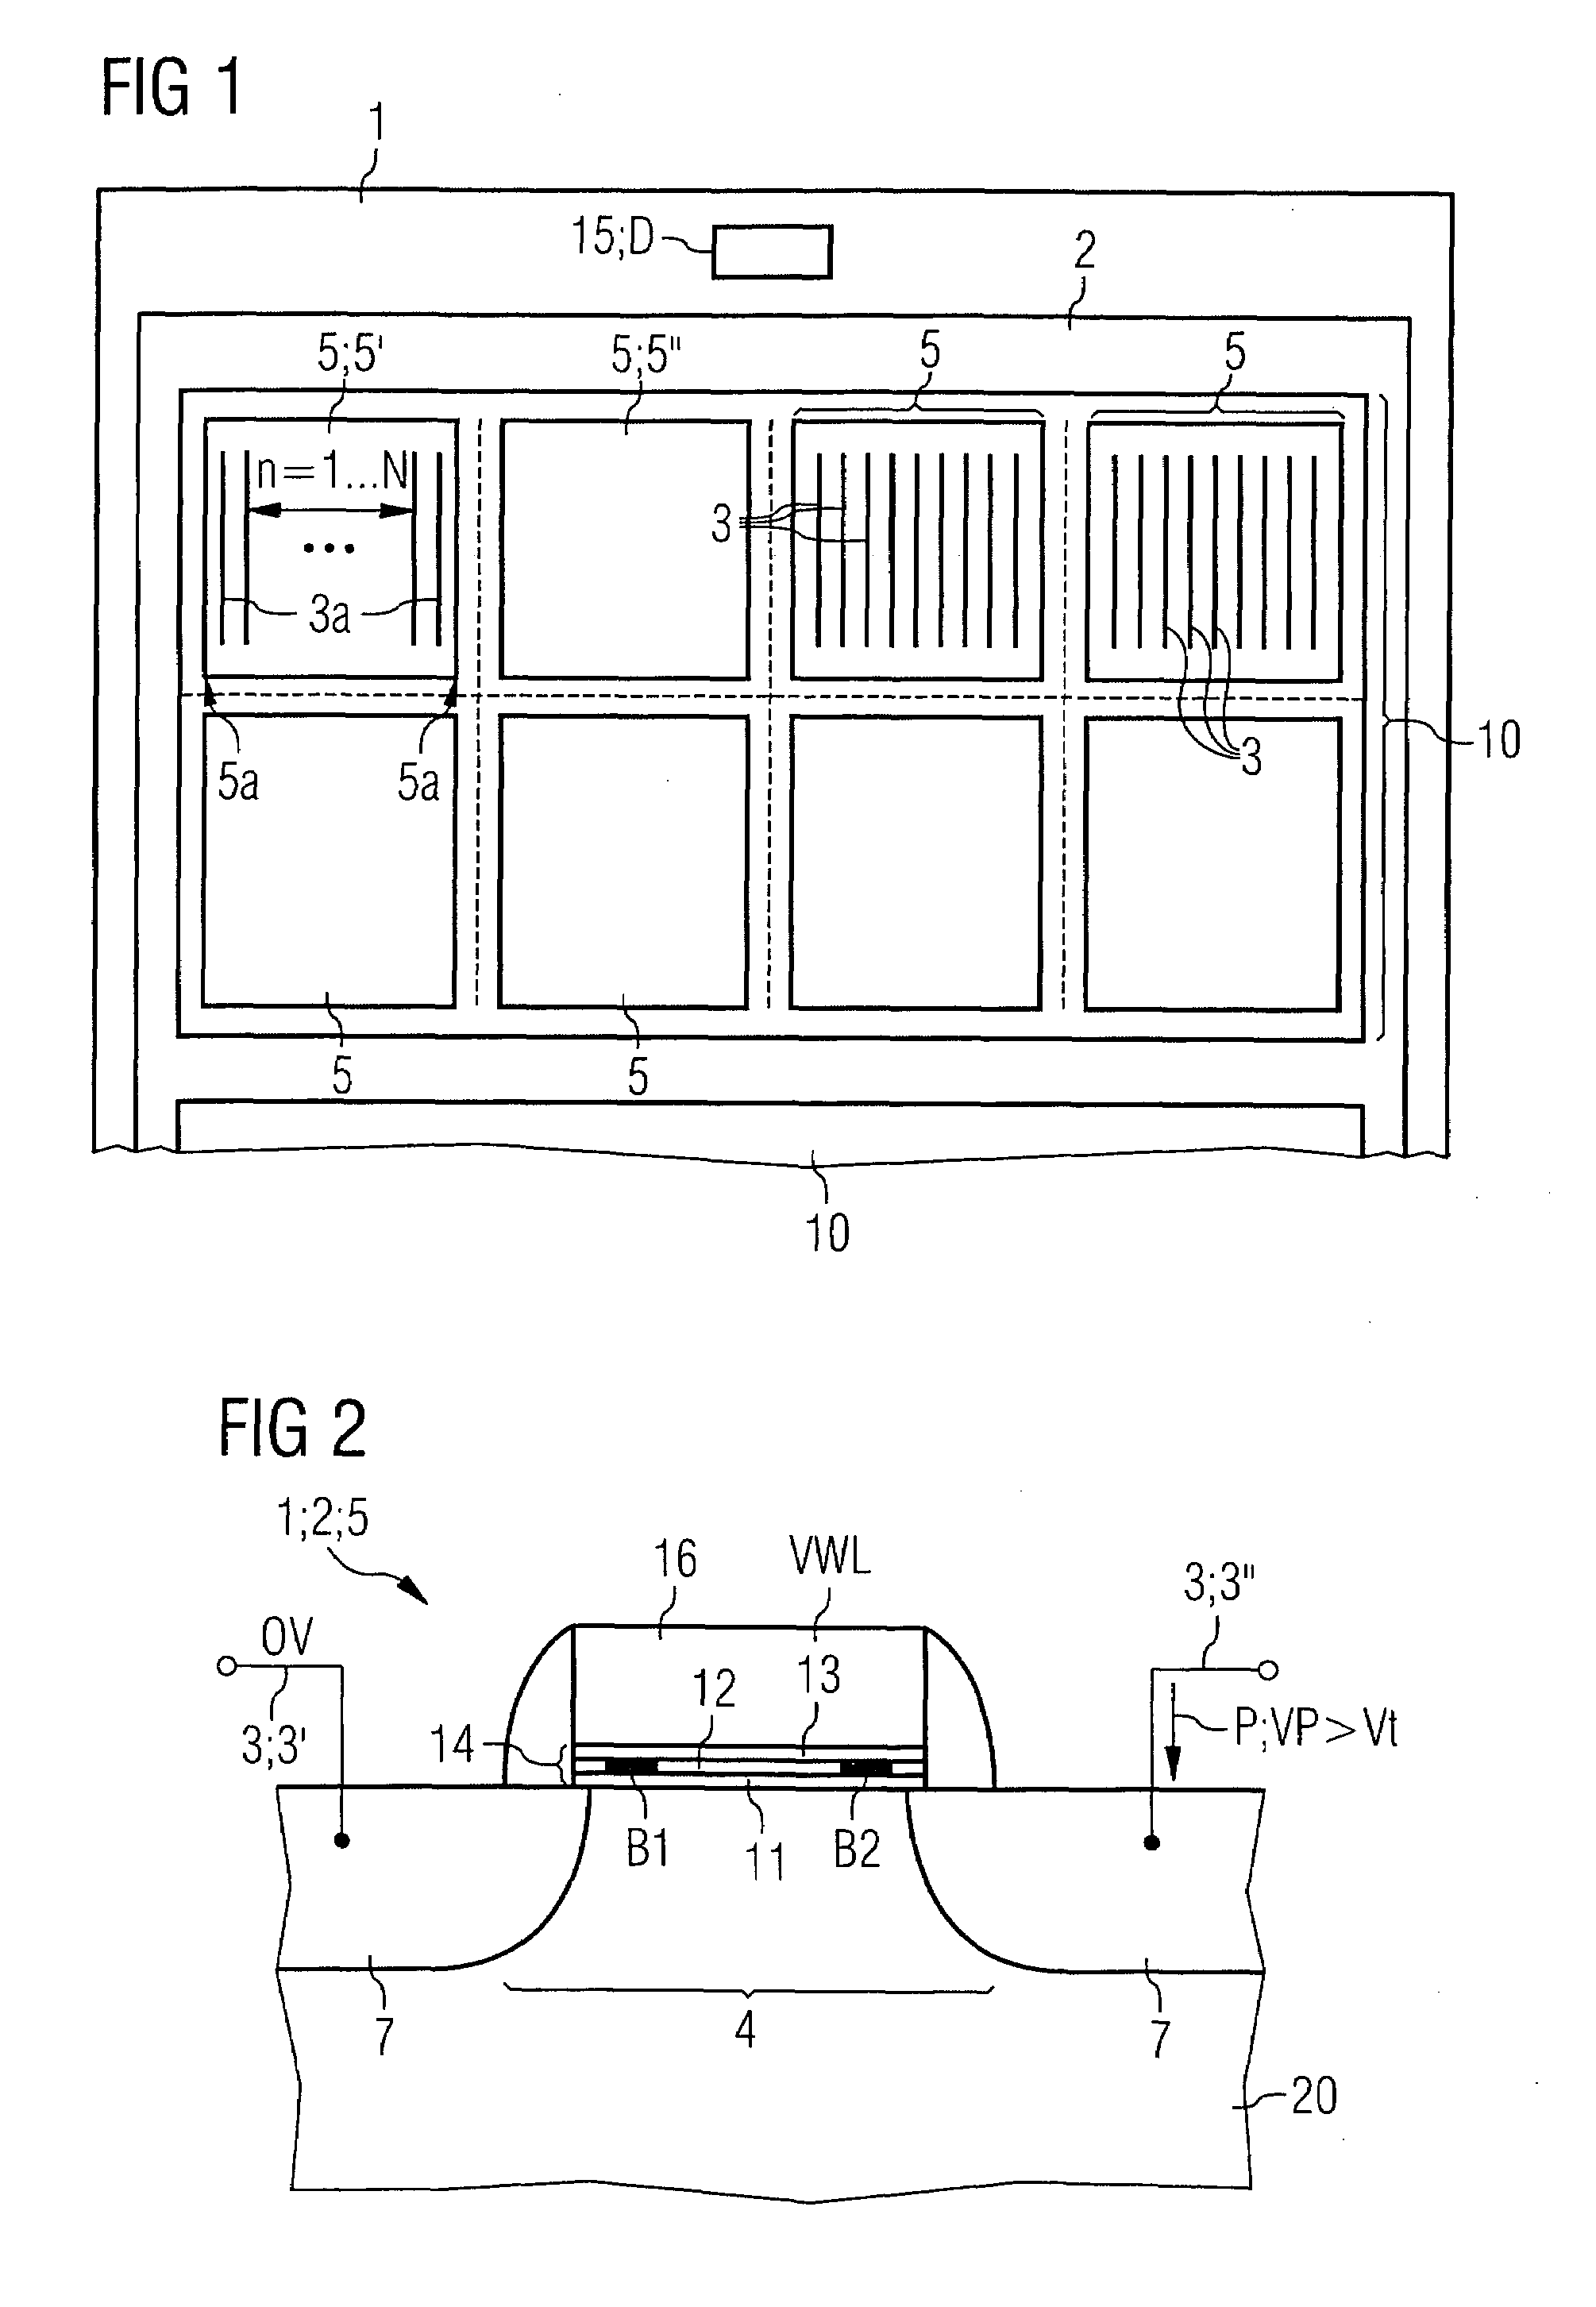 Memory device and method for operating a memory device